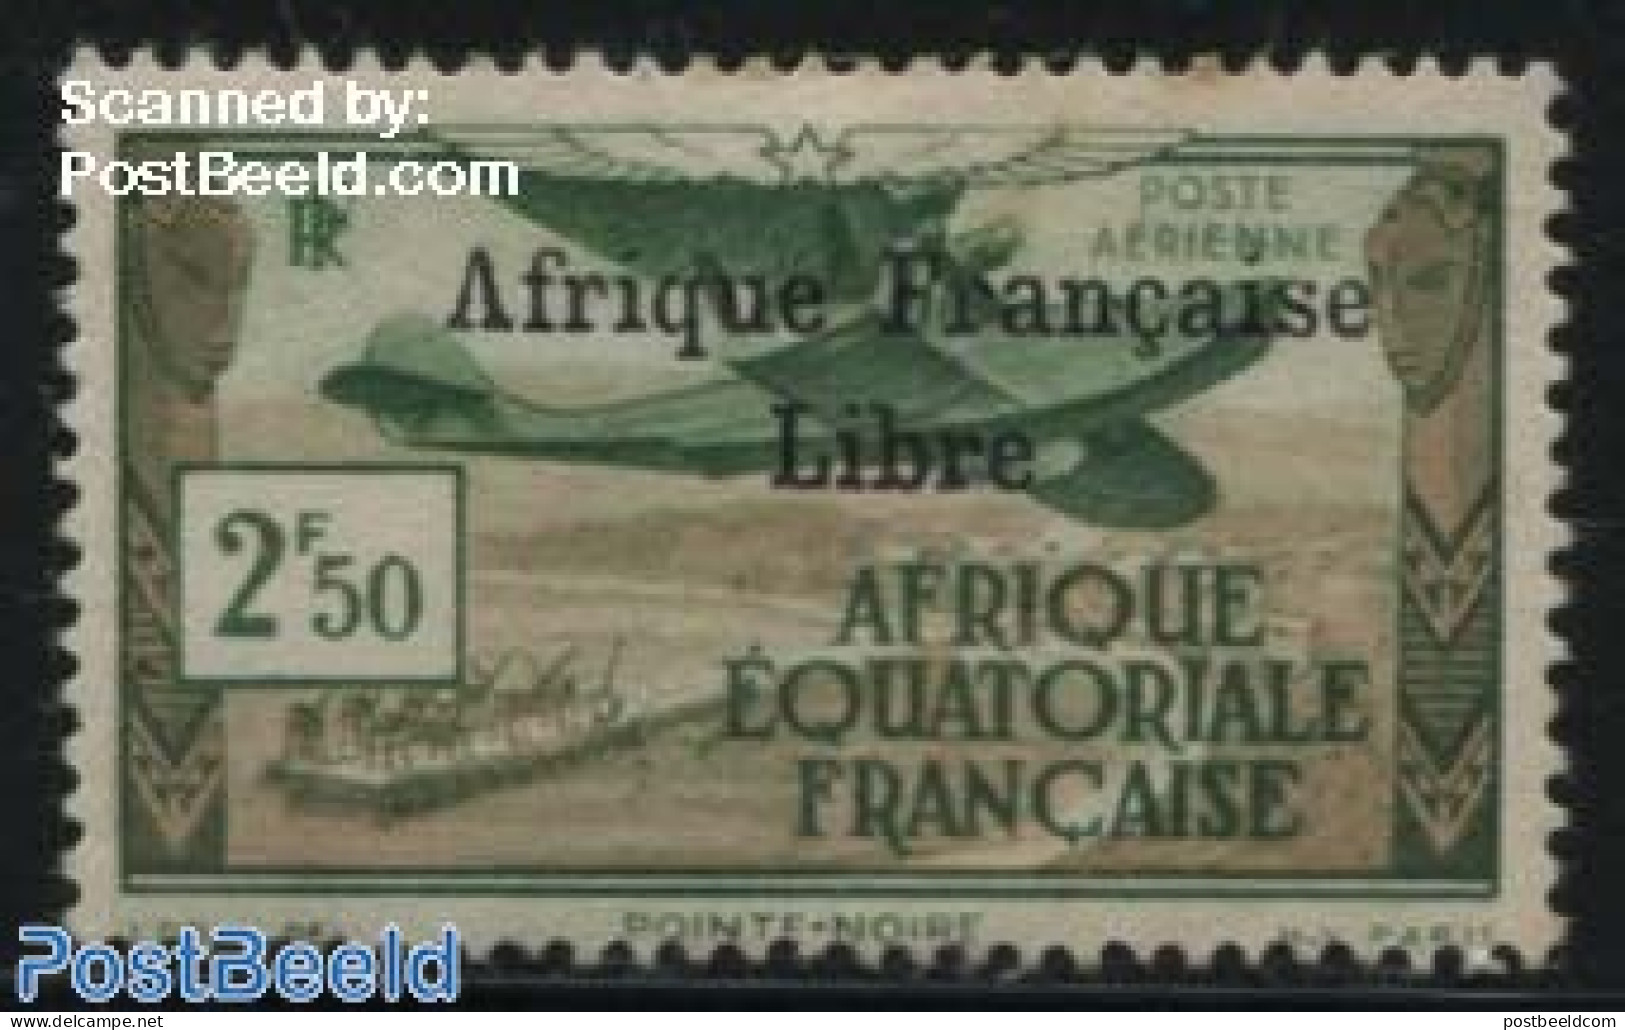 French Equatorial Africa 1940 1.50F, Stamp Out Of Set, Mint NH, Transport - Aircraft & Aviation - Ungebraucht